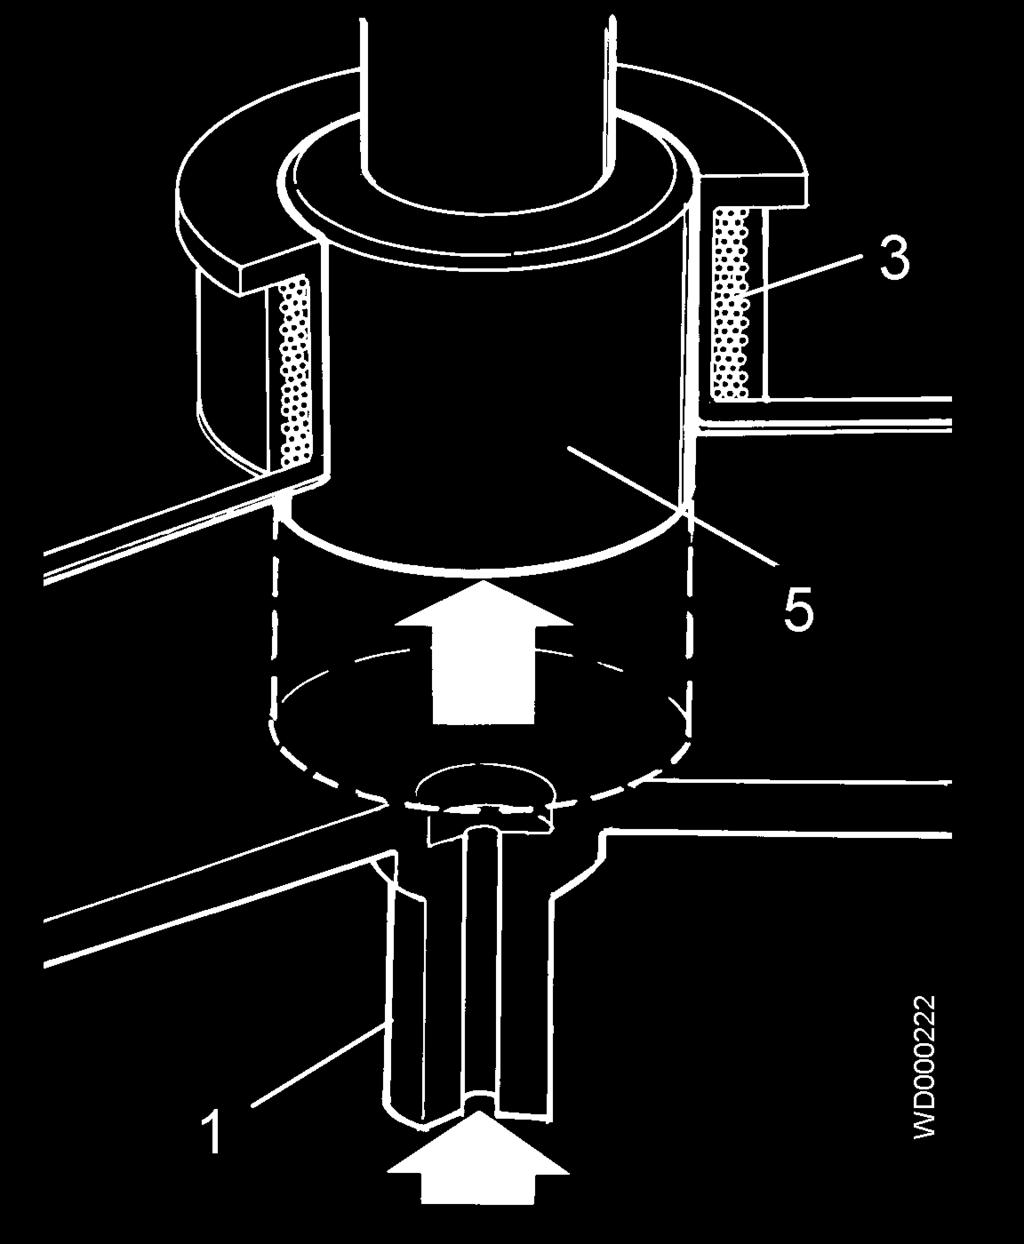 switch is connected by a hose to the pressure chamber.